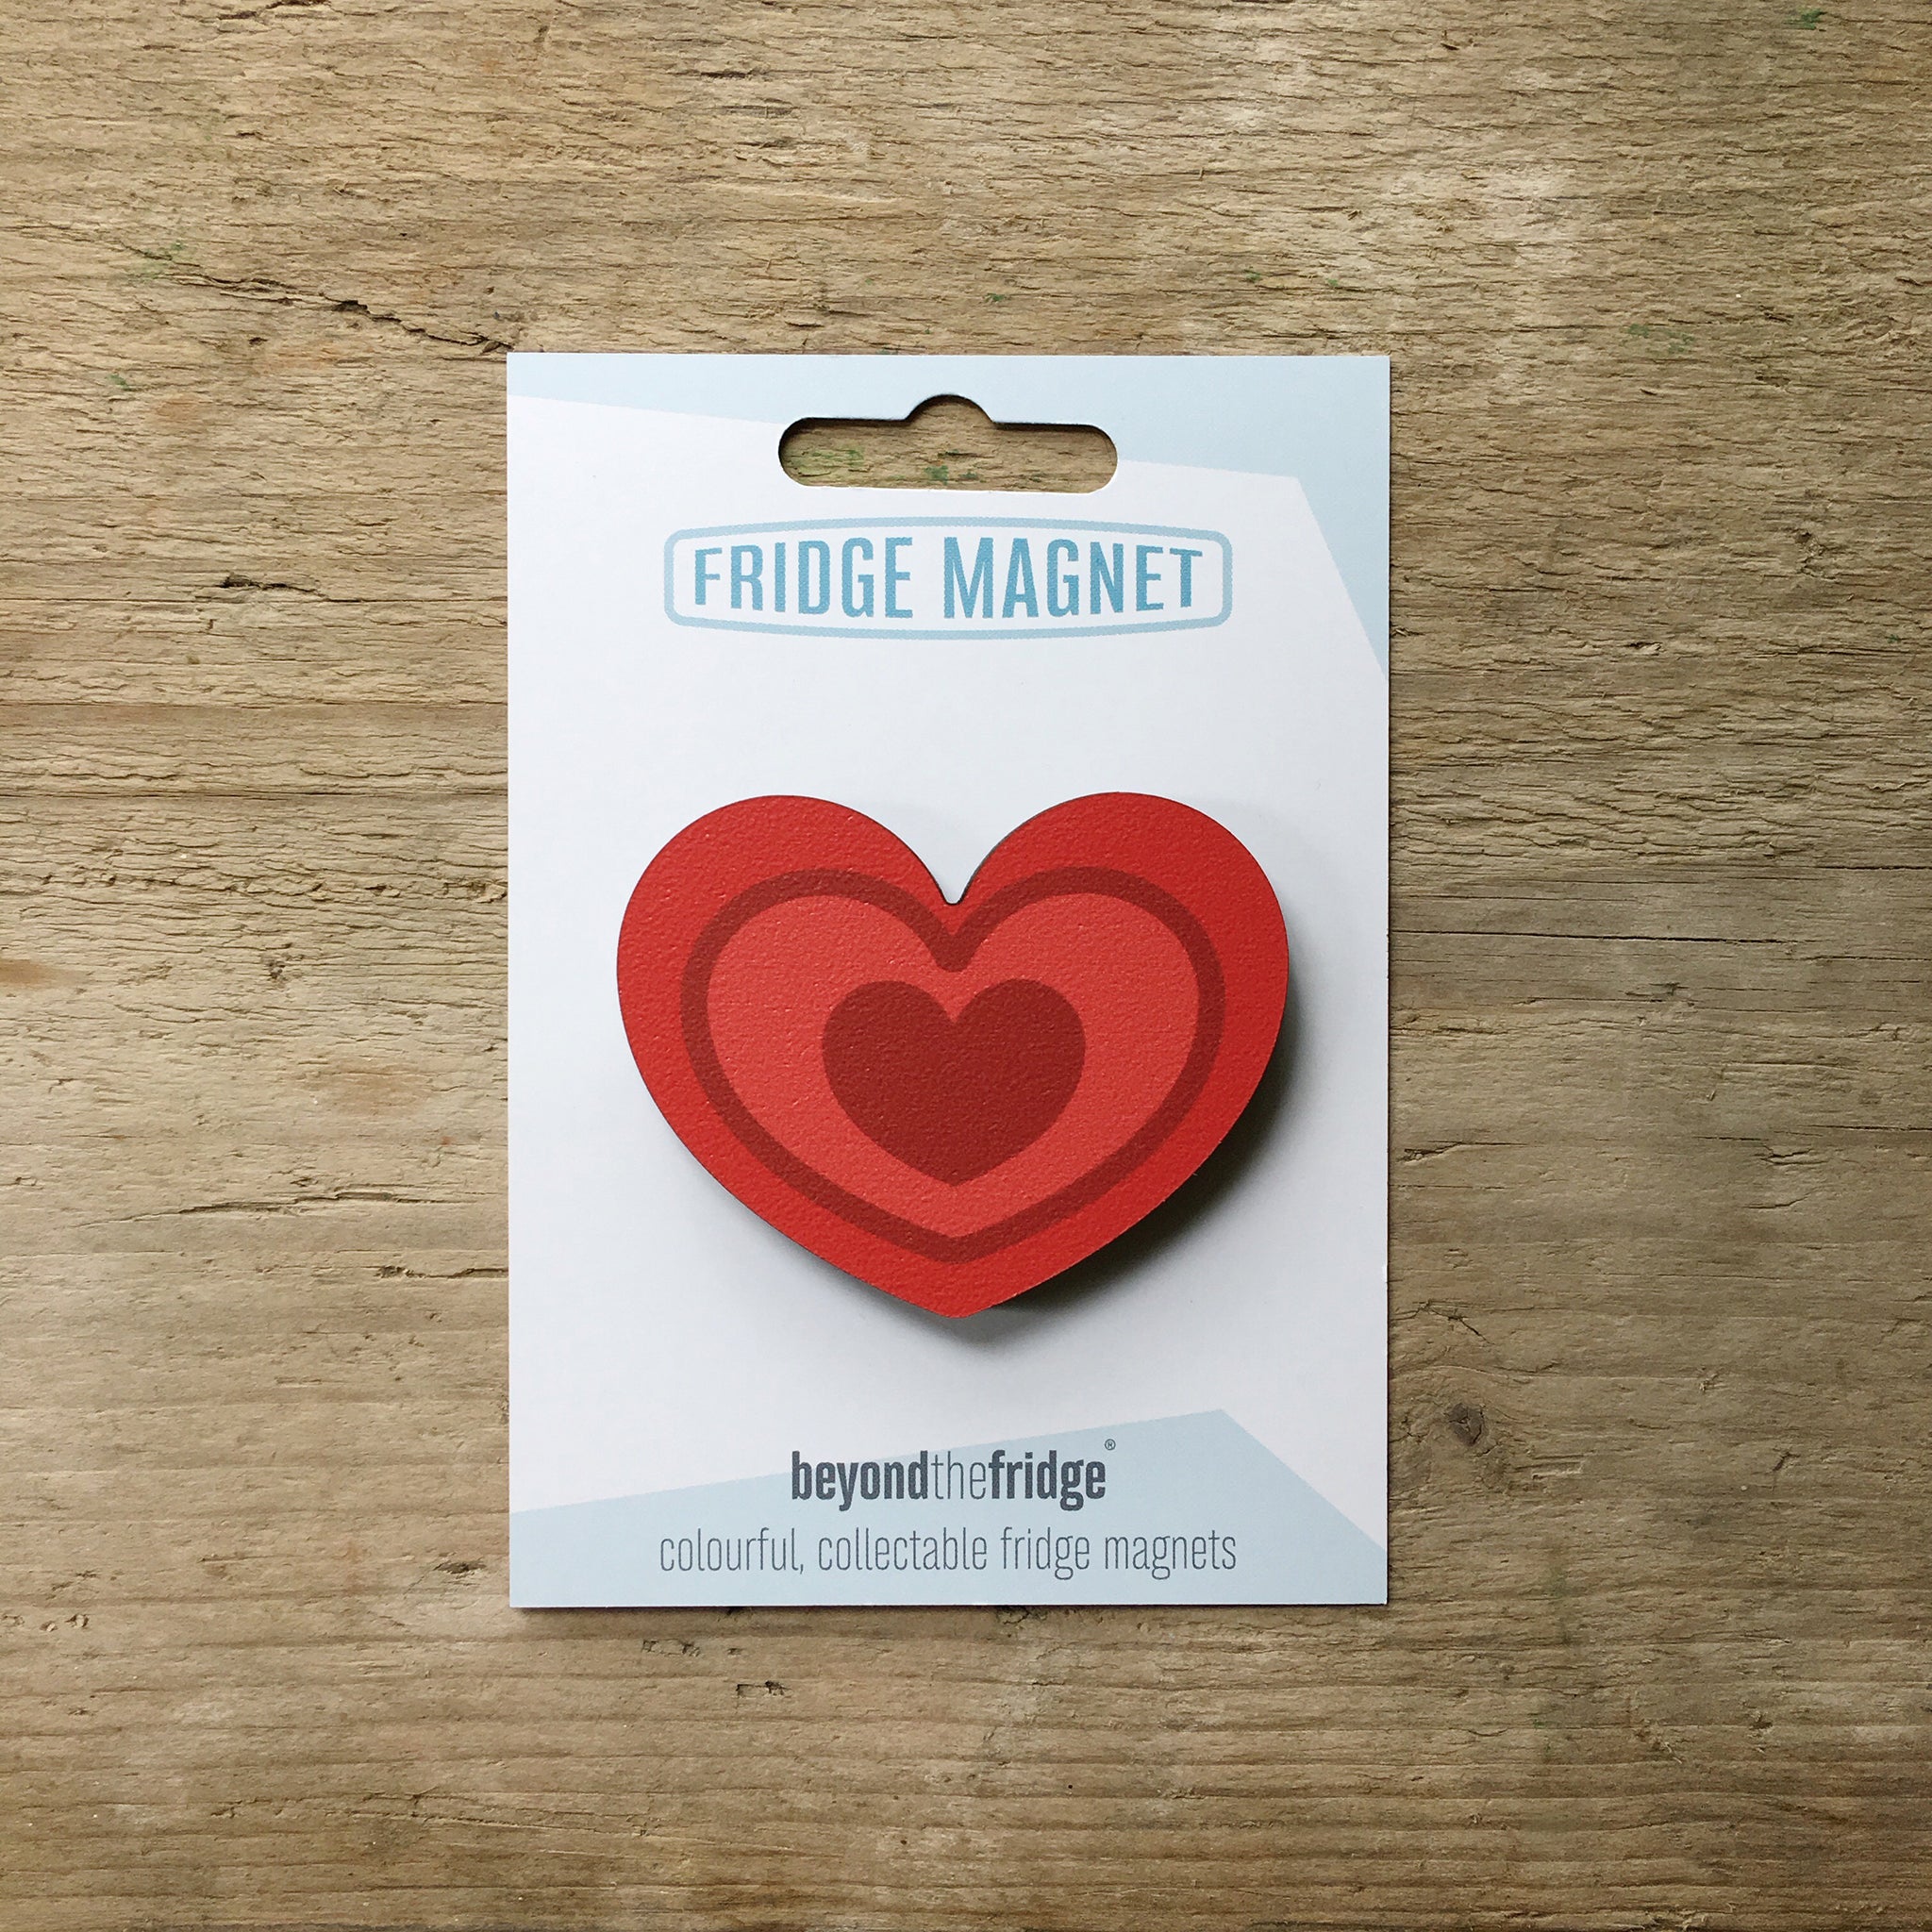 A red heart design plywood fridge magnet by Beyond the Fridge in it’s pack on a wooden background